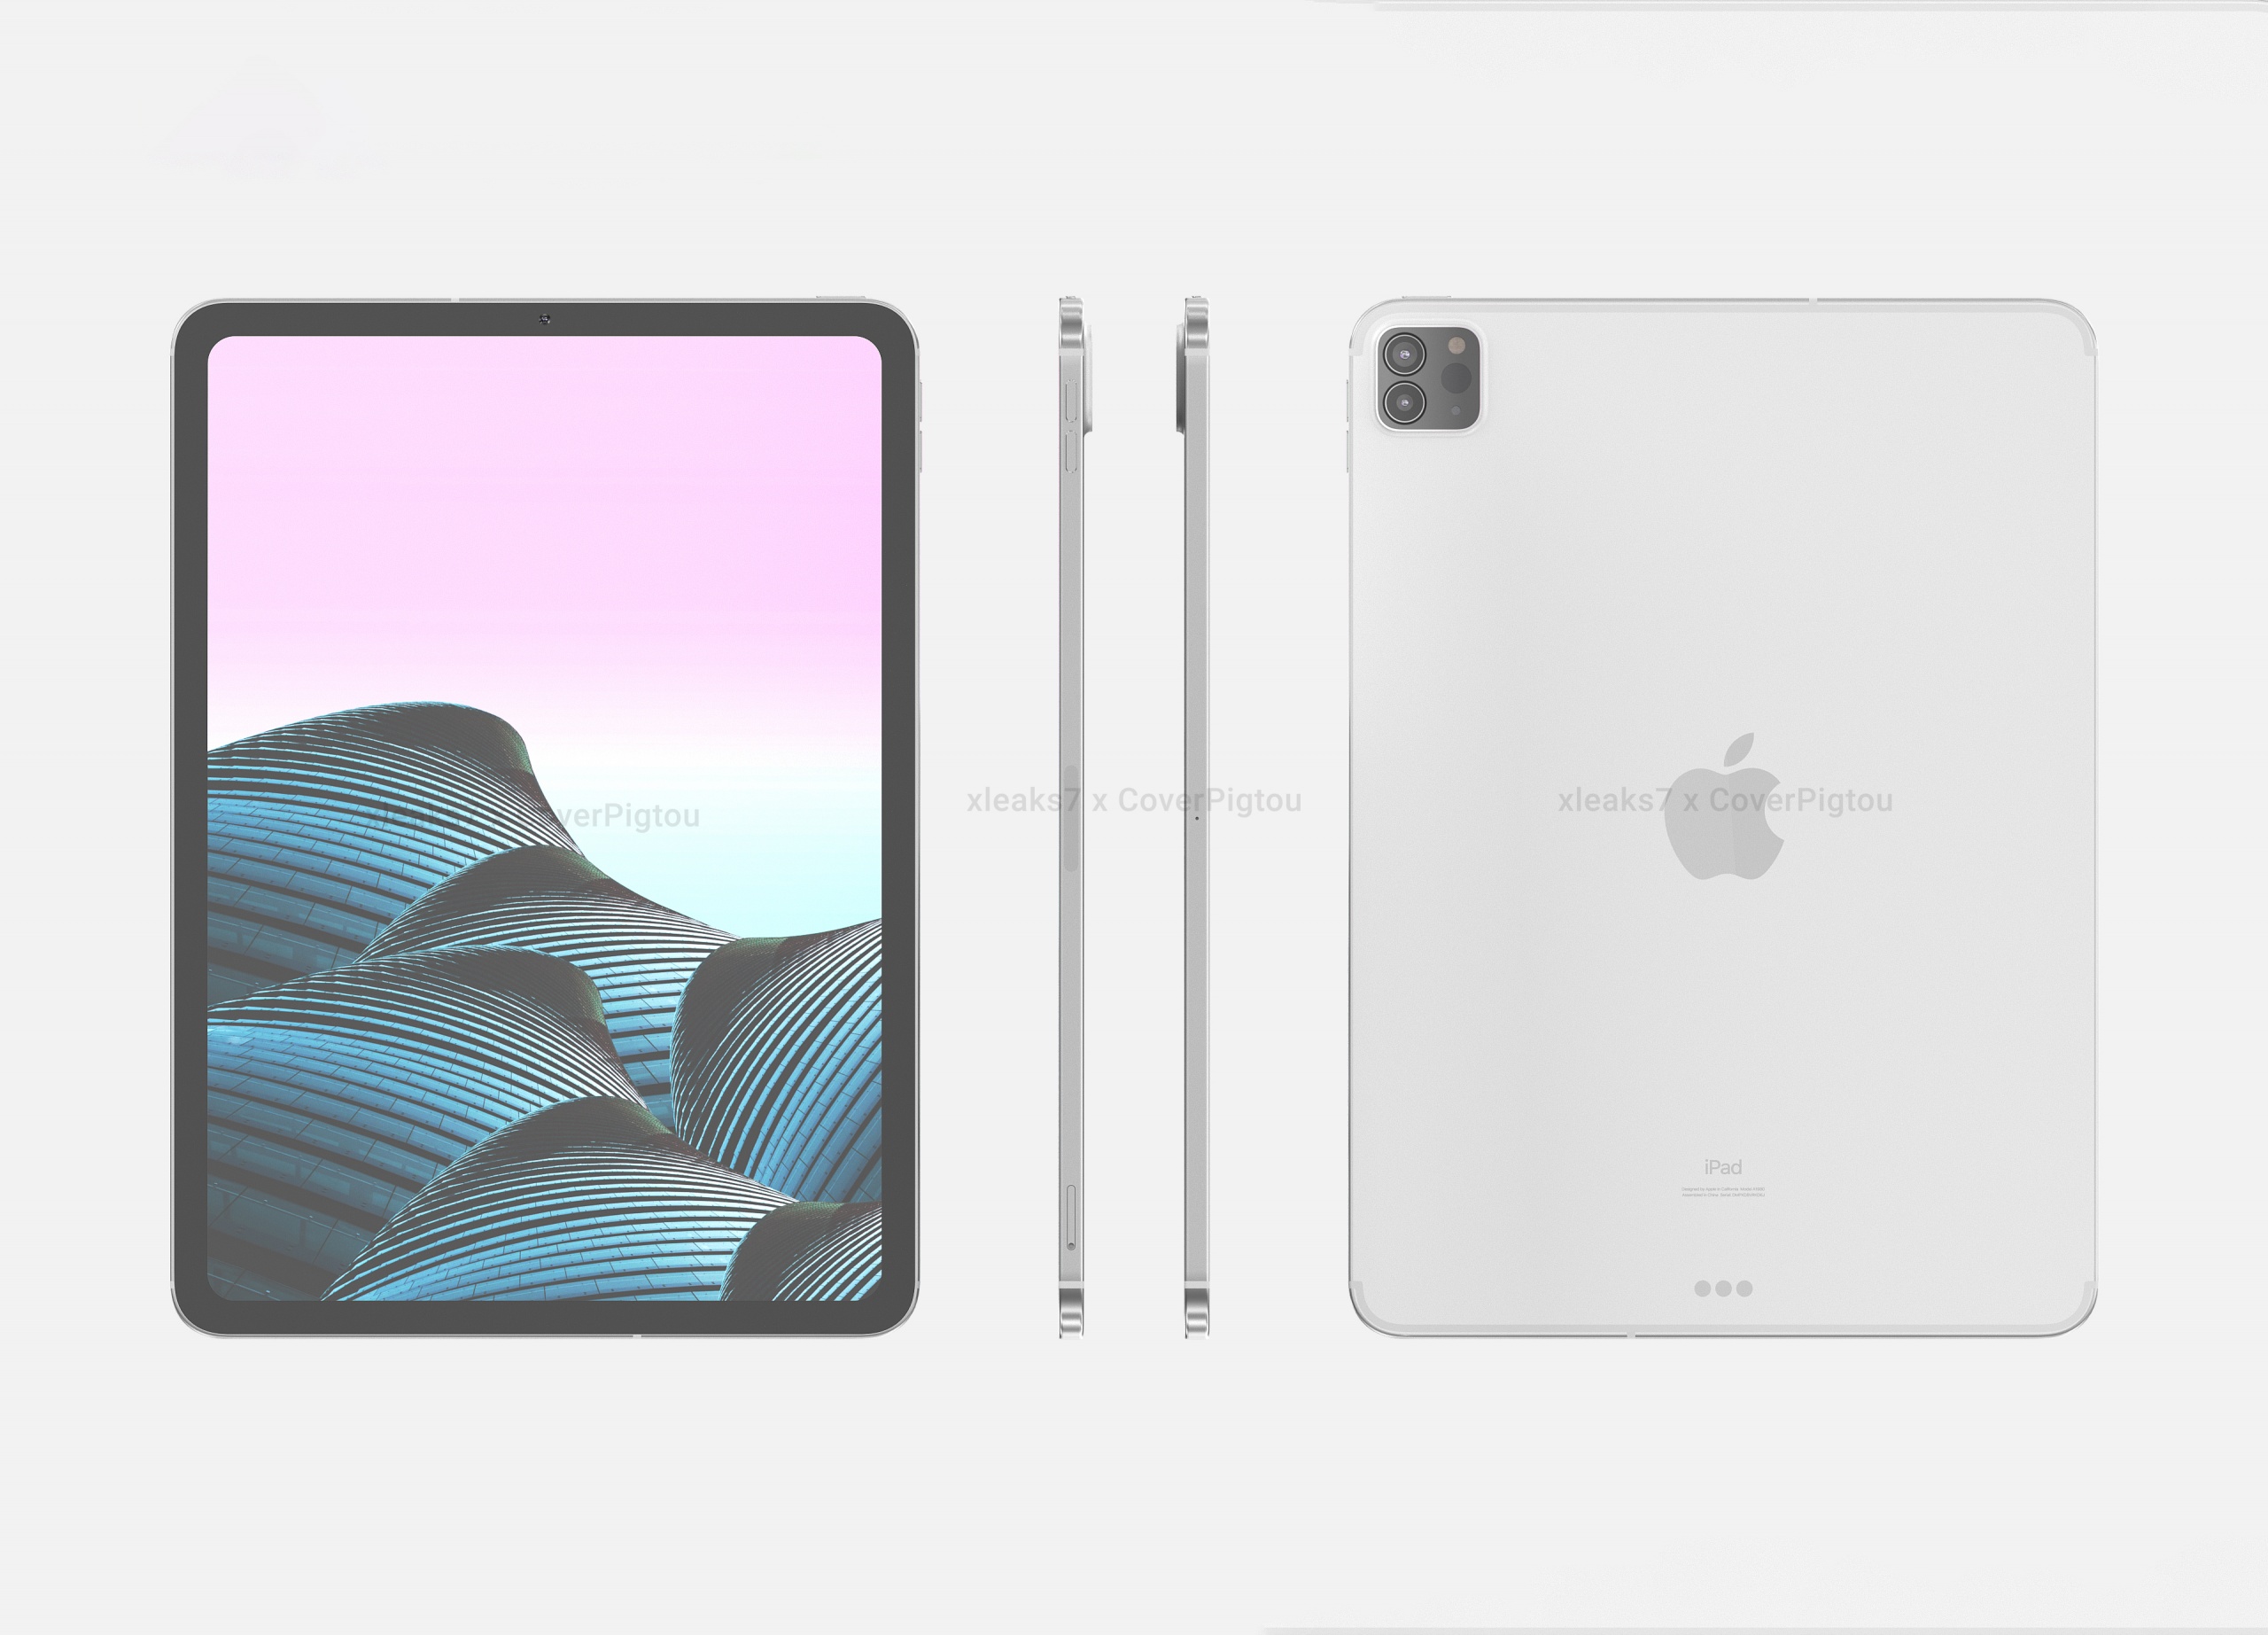 iPad Pro 11-inch 2021 To Follow Same Design as Current ...